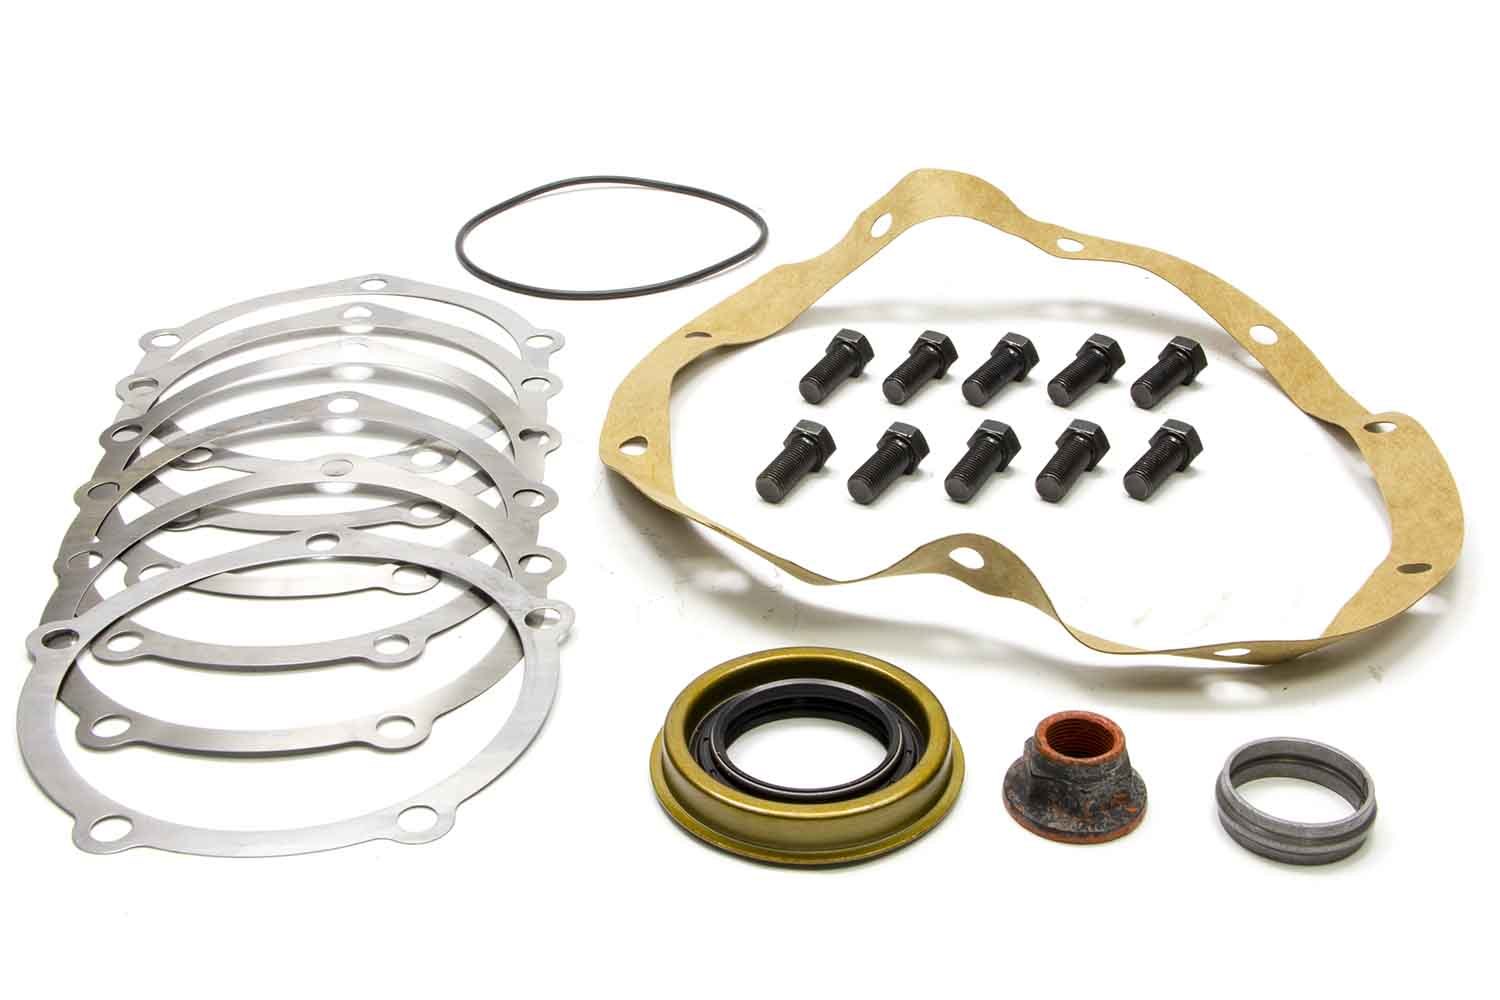 Ratech 106K Differential Installation Kit, Crush Sleeve / Gaskets / Hardware / Seals / Shims, Ford 9 in, Kit